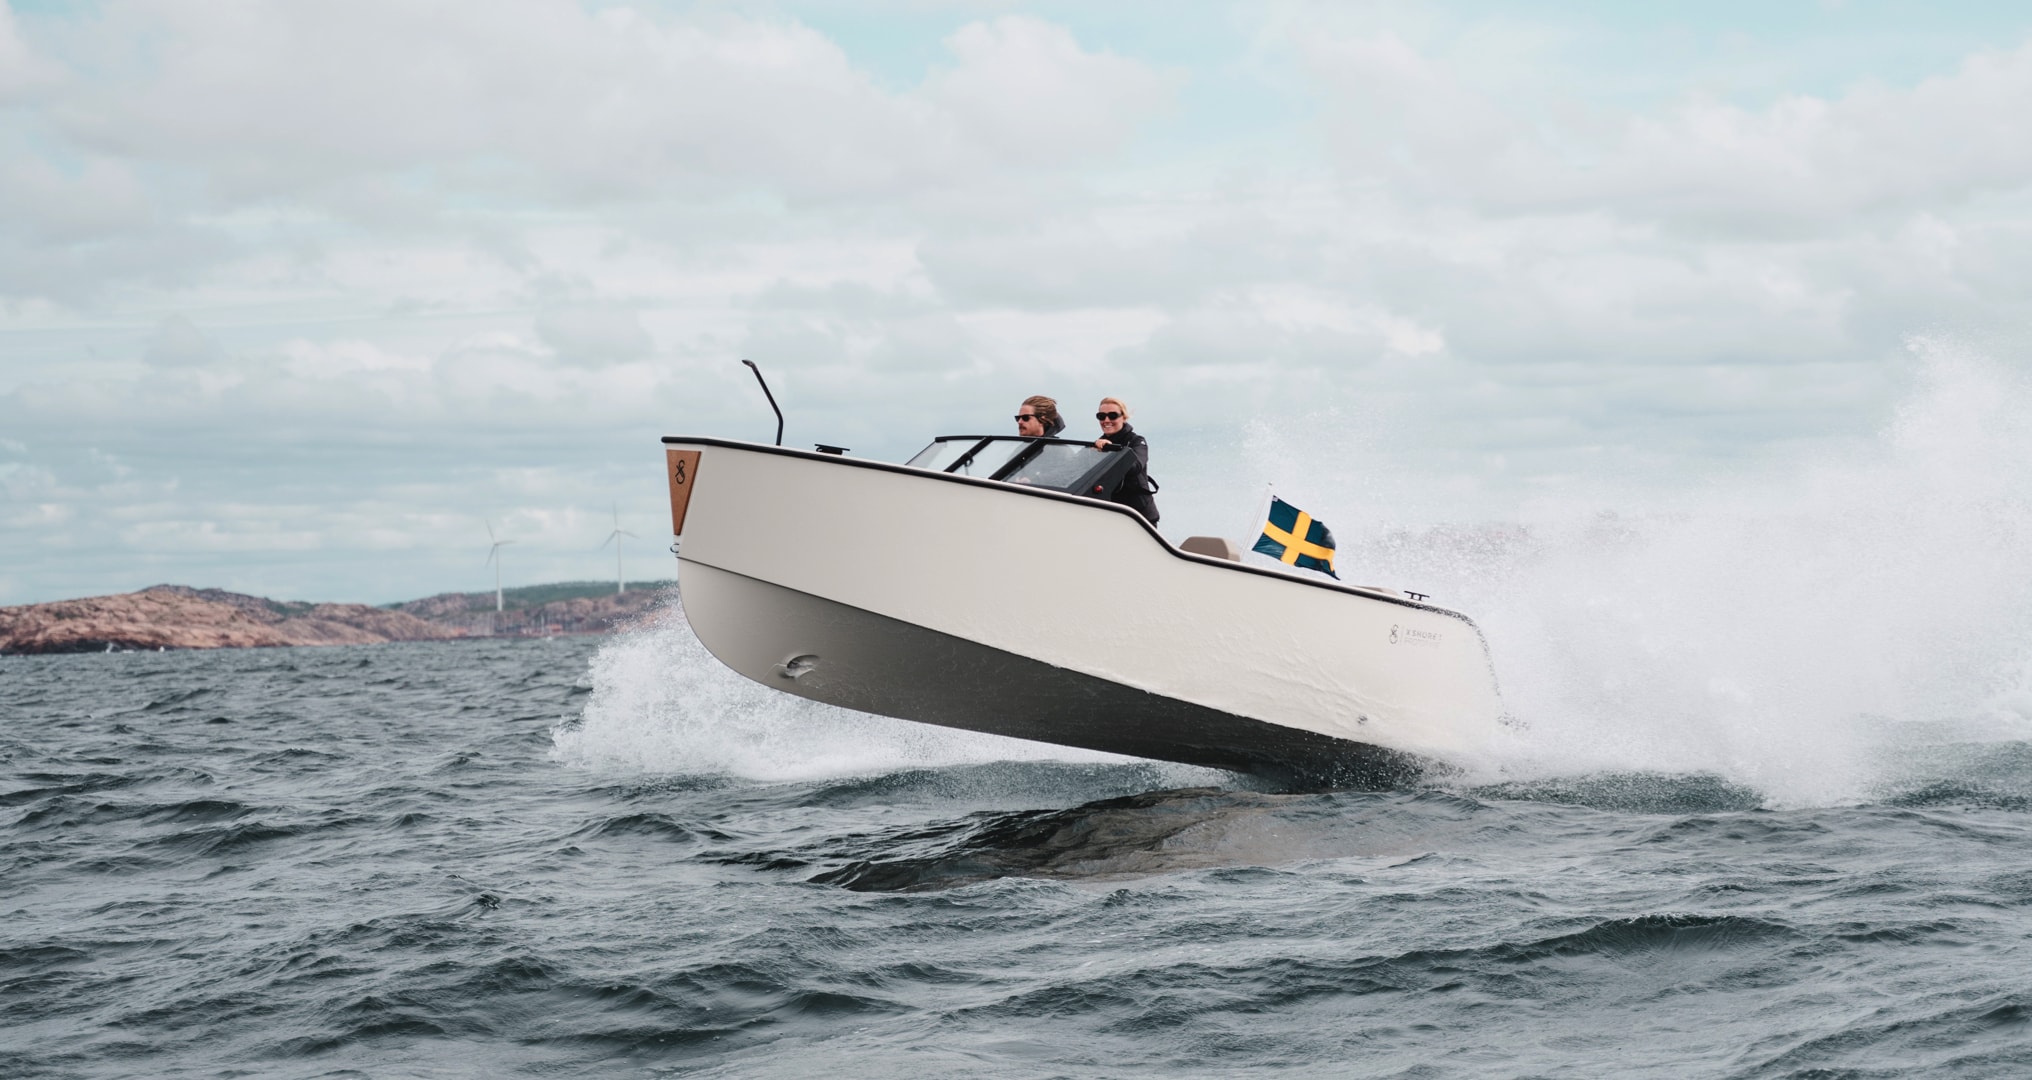 https://s1.cdn.autoevolution.com/images/news/swedish-made-x-shore-1-electric-boat-hits-the-market-is-stylish-silent-and-affordable-197592_1.jpeg